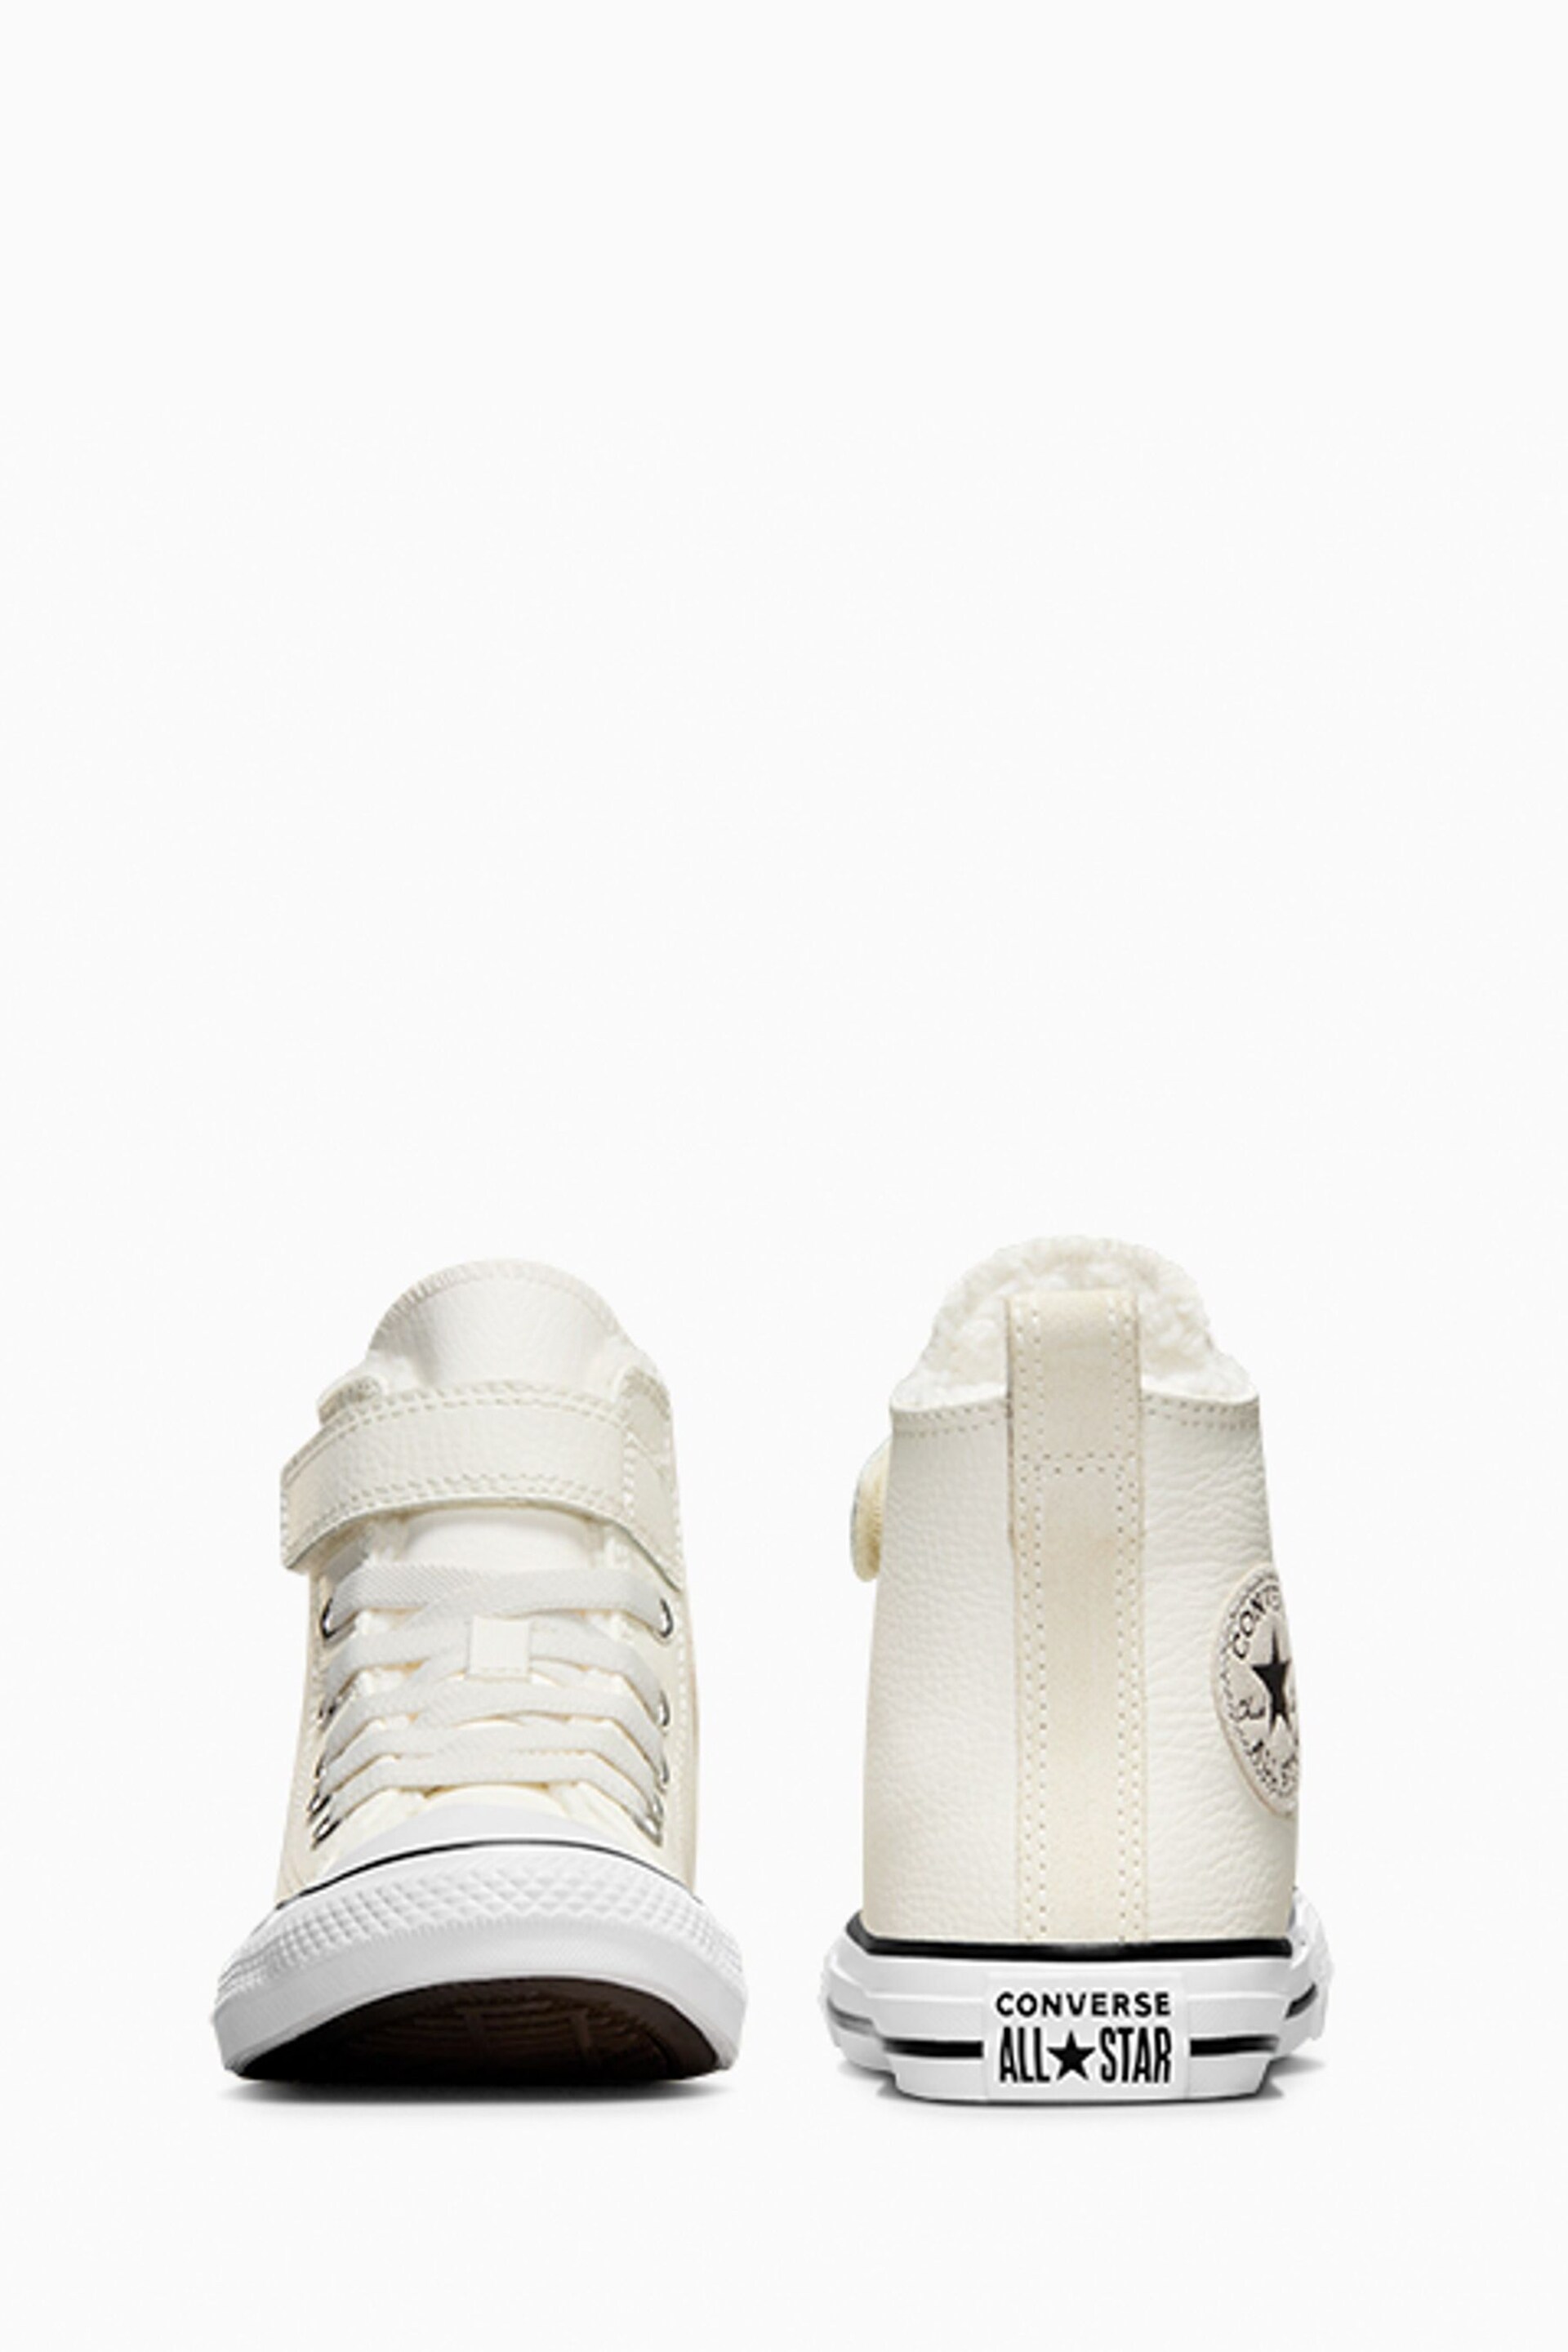 Converse White Easy On Leather Fleece Lined Junior Trainers - Image 4 of 9